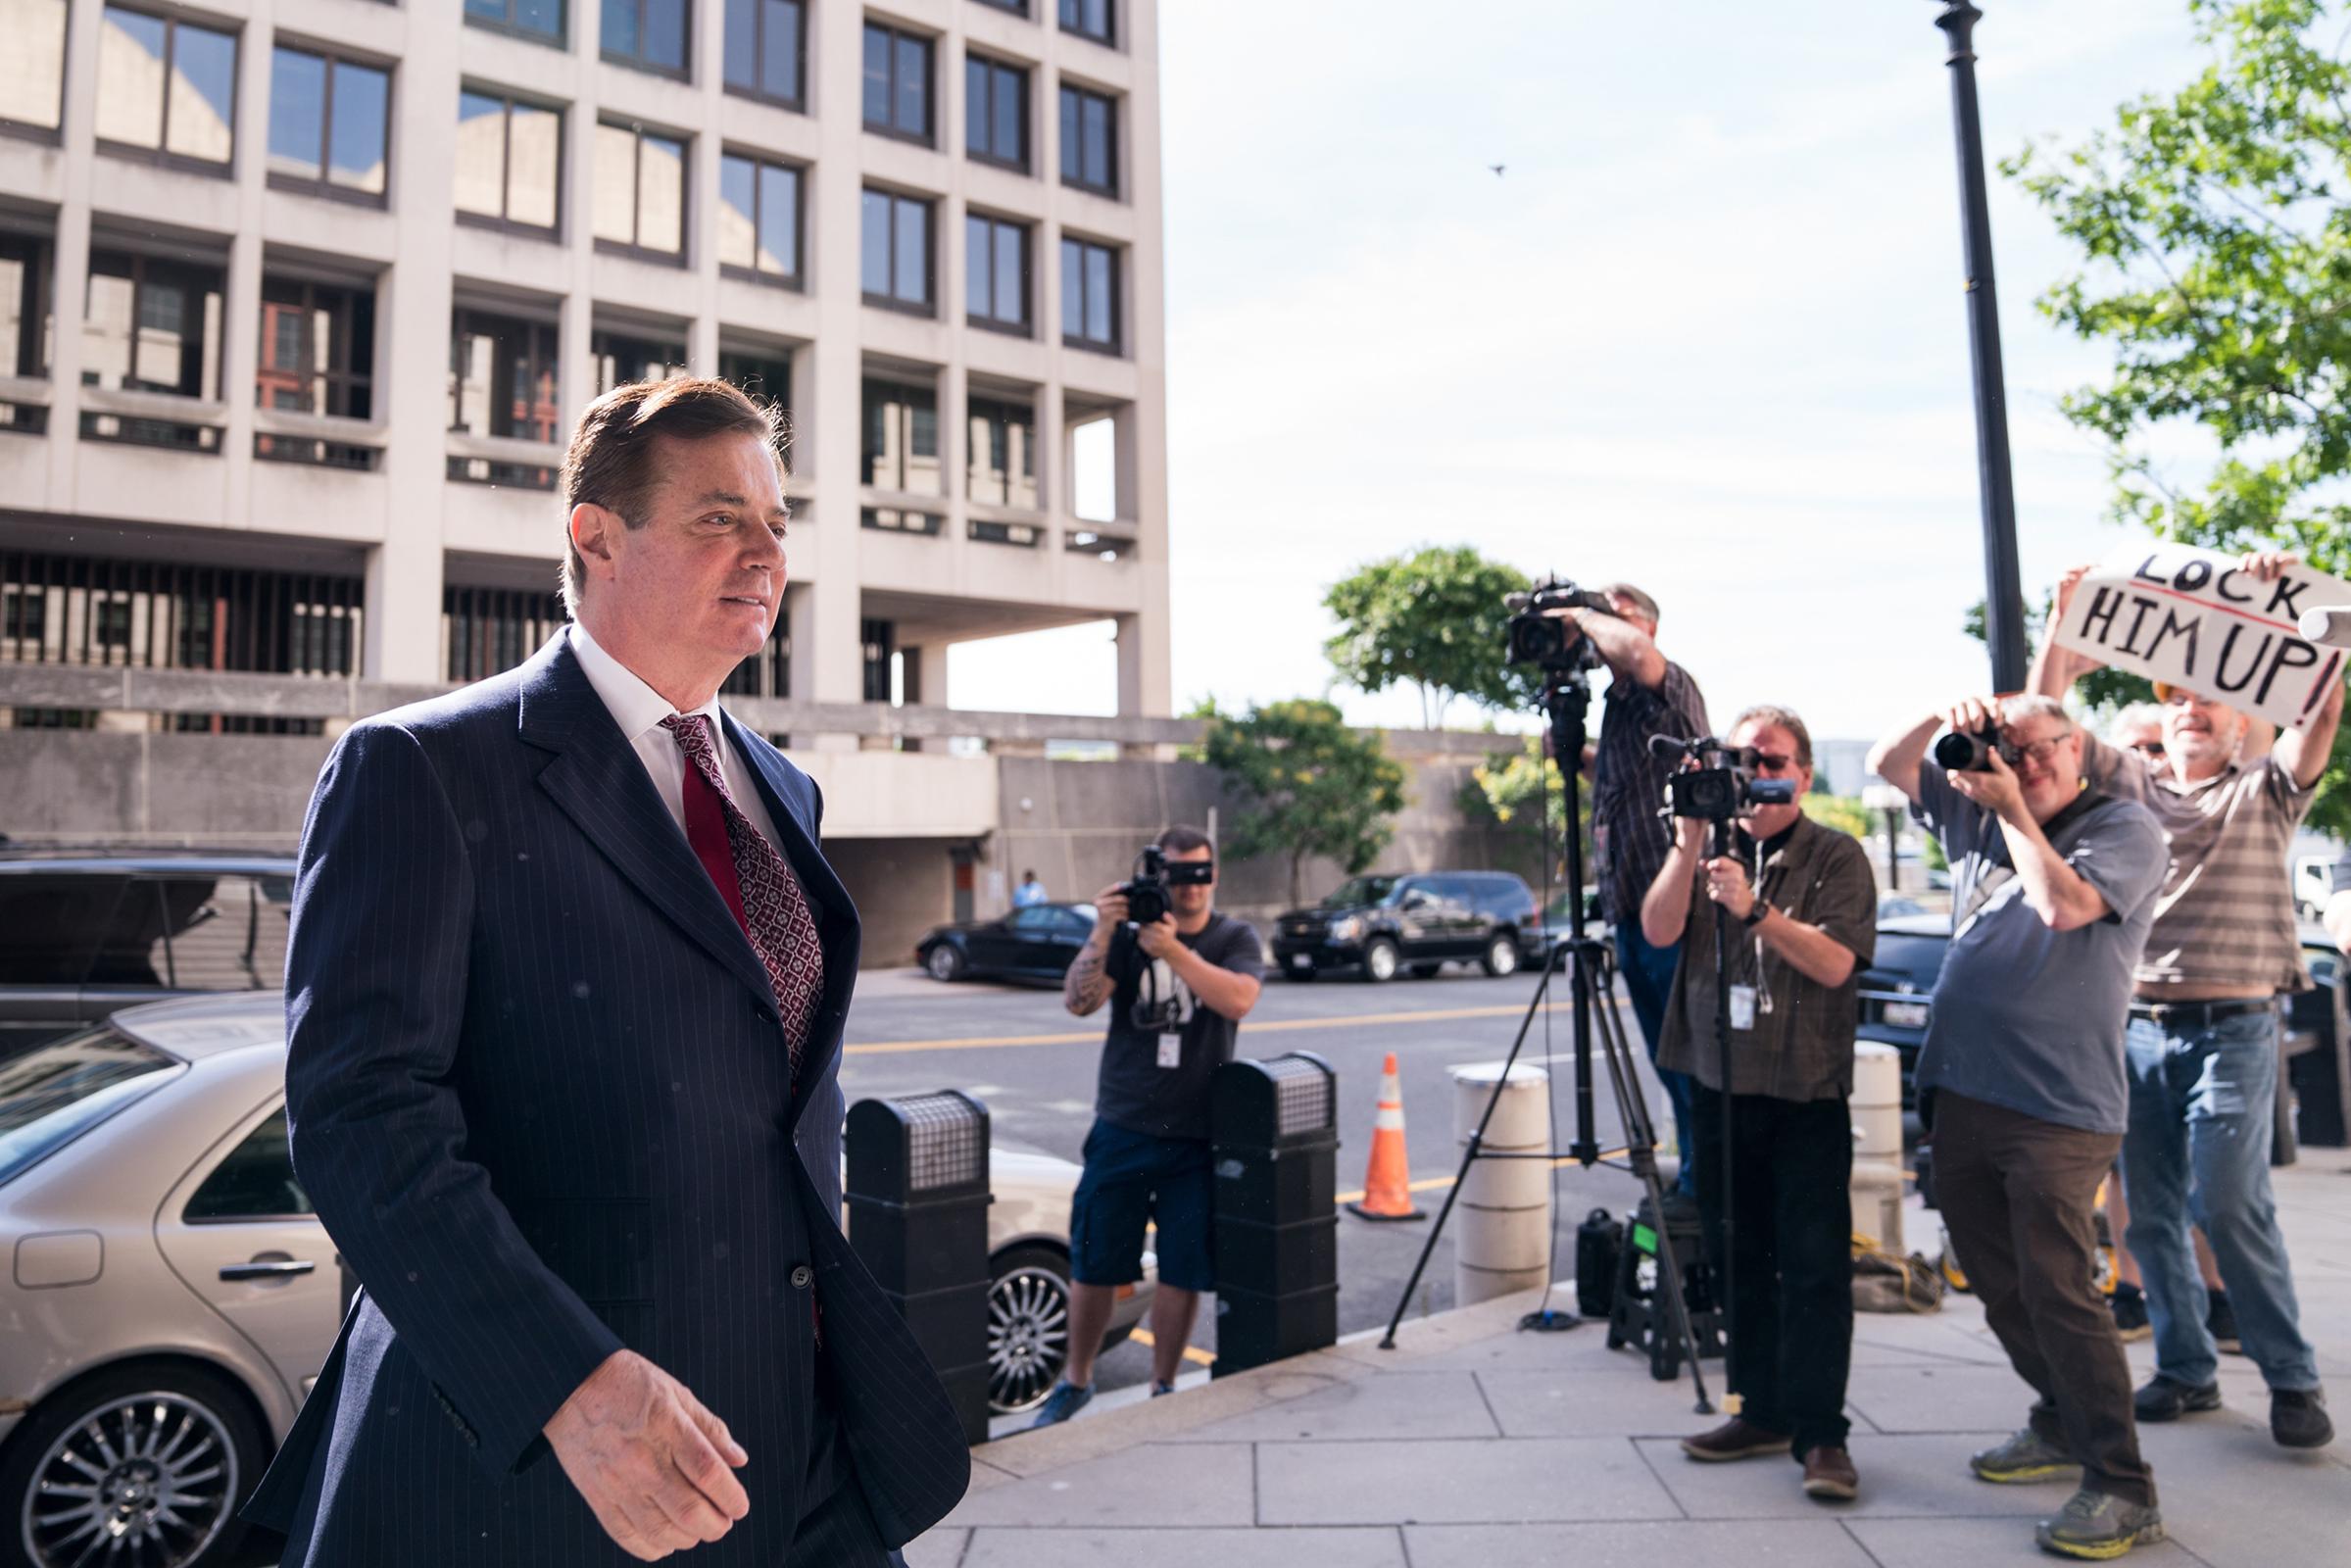 Manafort, outside a federal courthouse in Washington in June, was found guilty of eight counts of bank and tax fraud on Aug. 21